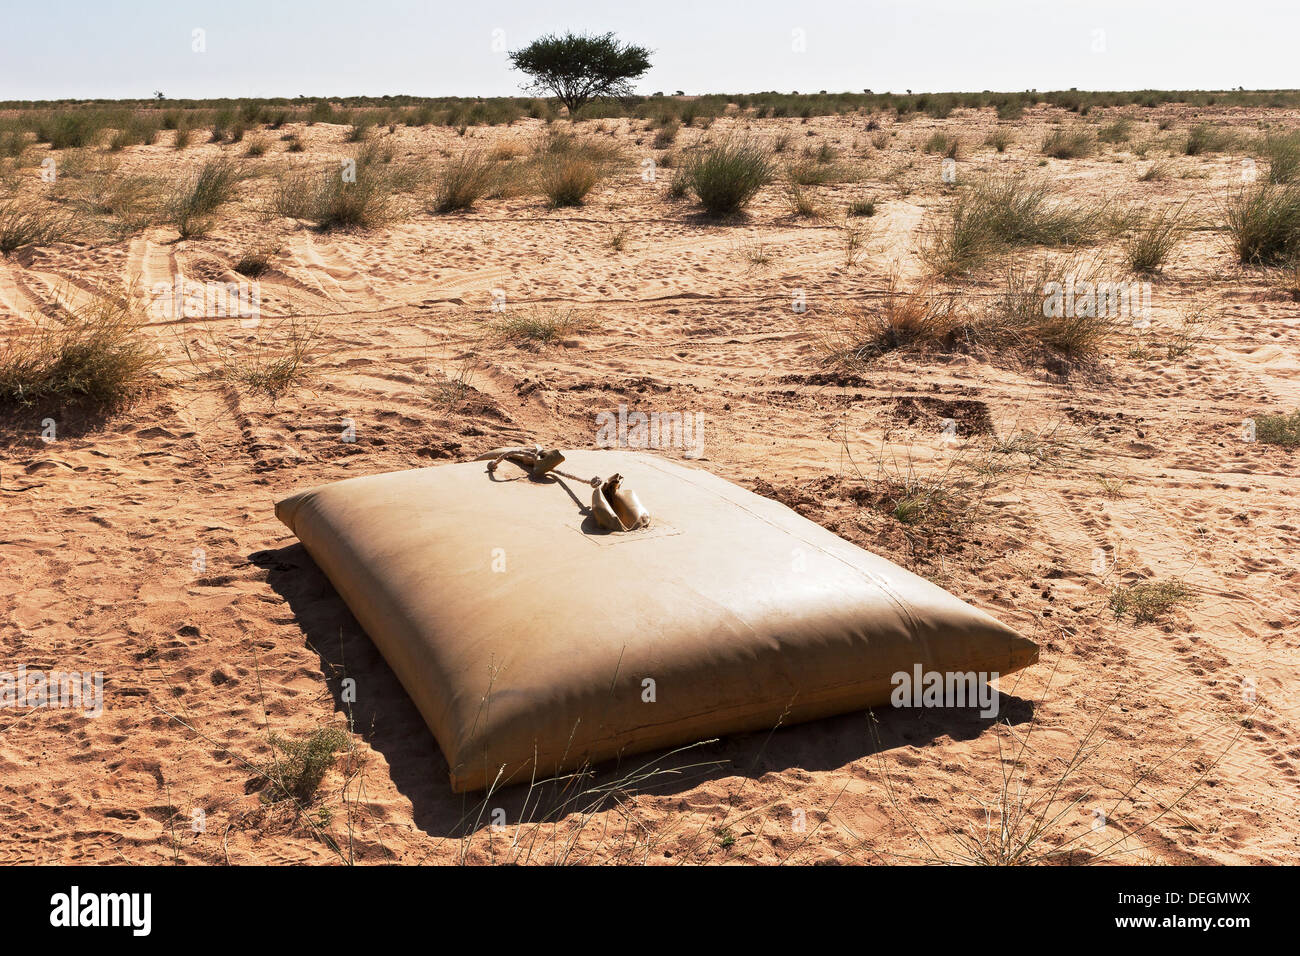 Potable water storage bladder in Sahara Desert, NW Mauritania, for use by nomadic communities in remote arid areas, Africa Stock Photo